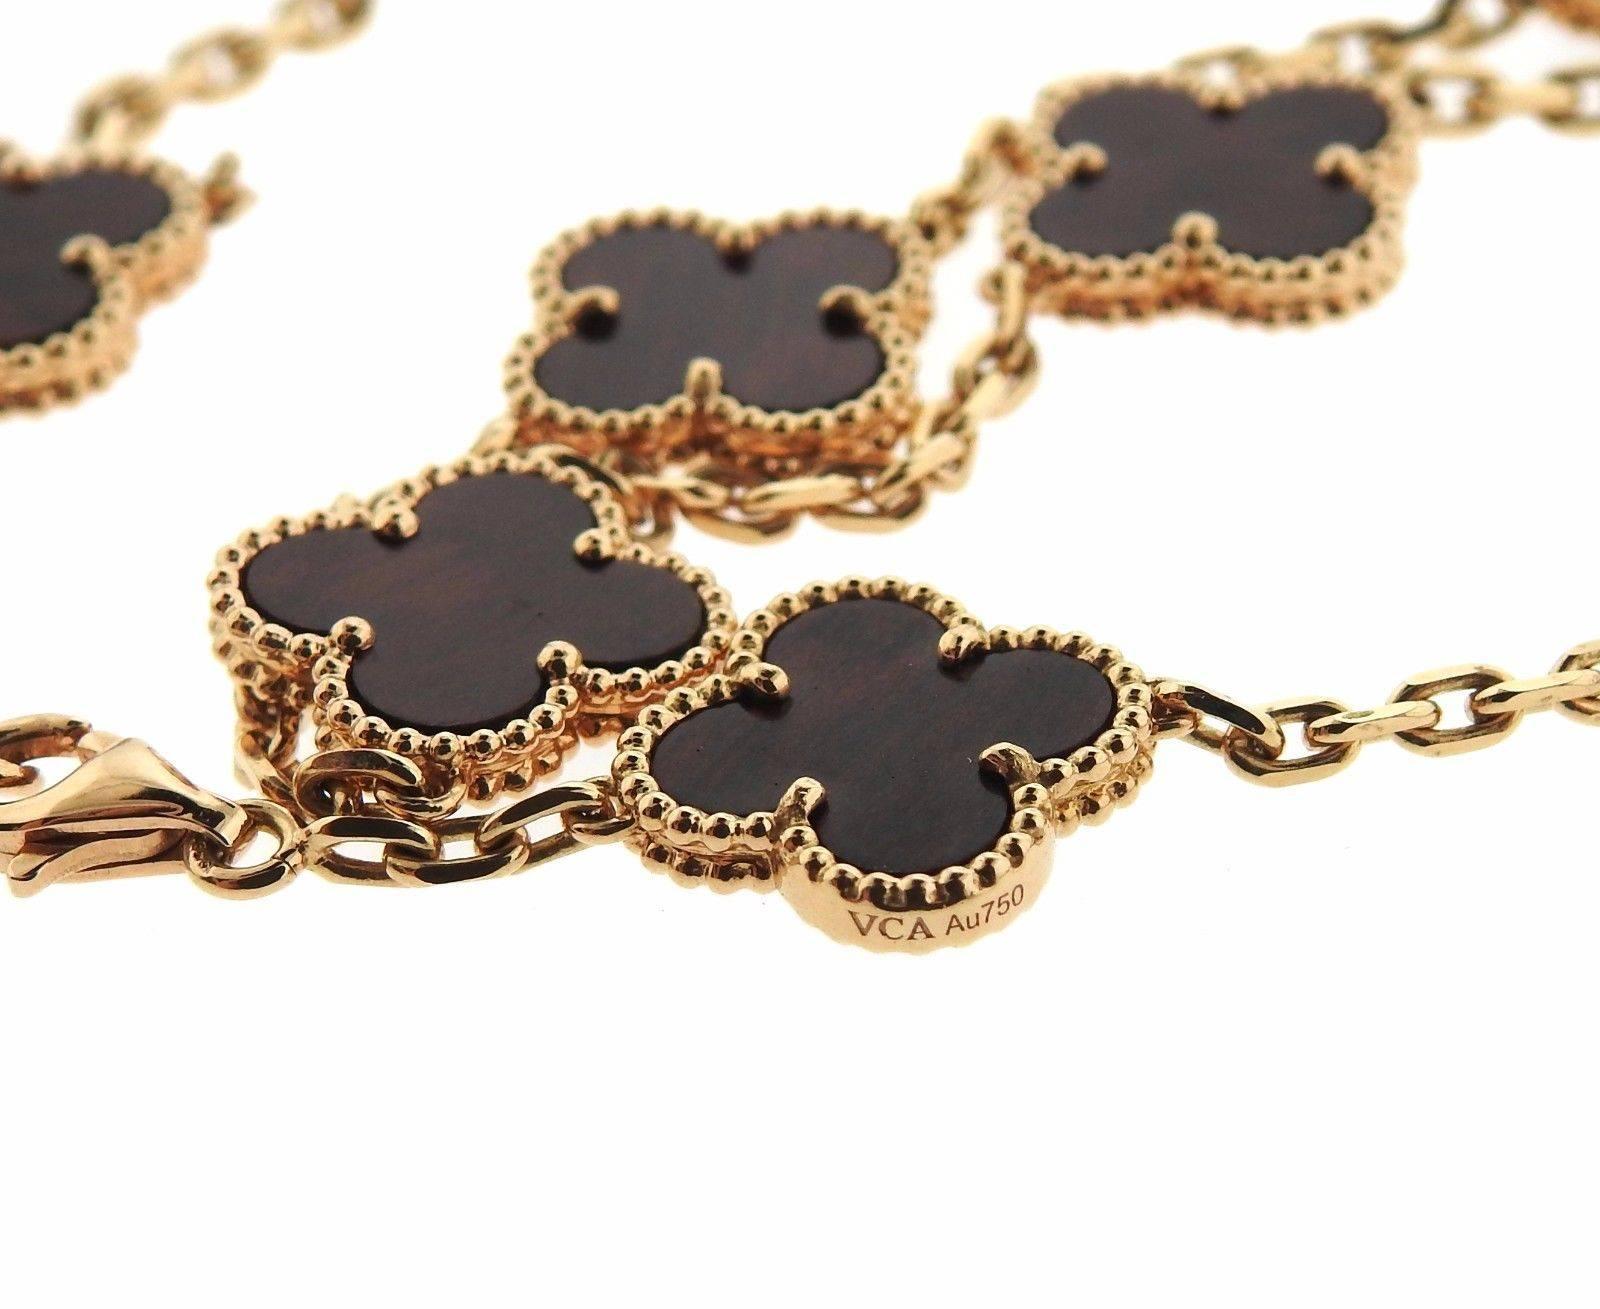 An 18k rose gold necklace set with wood clover motifs.  The necklace measures 33